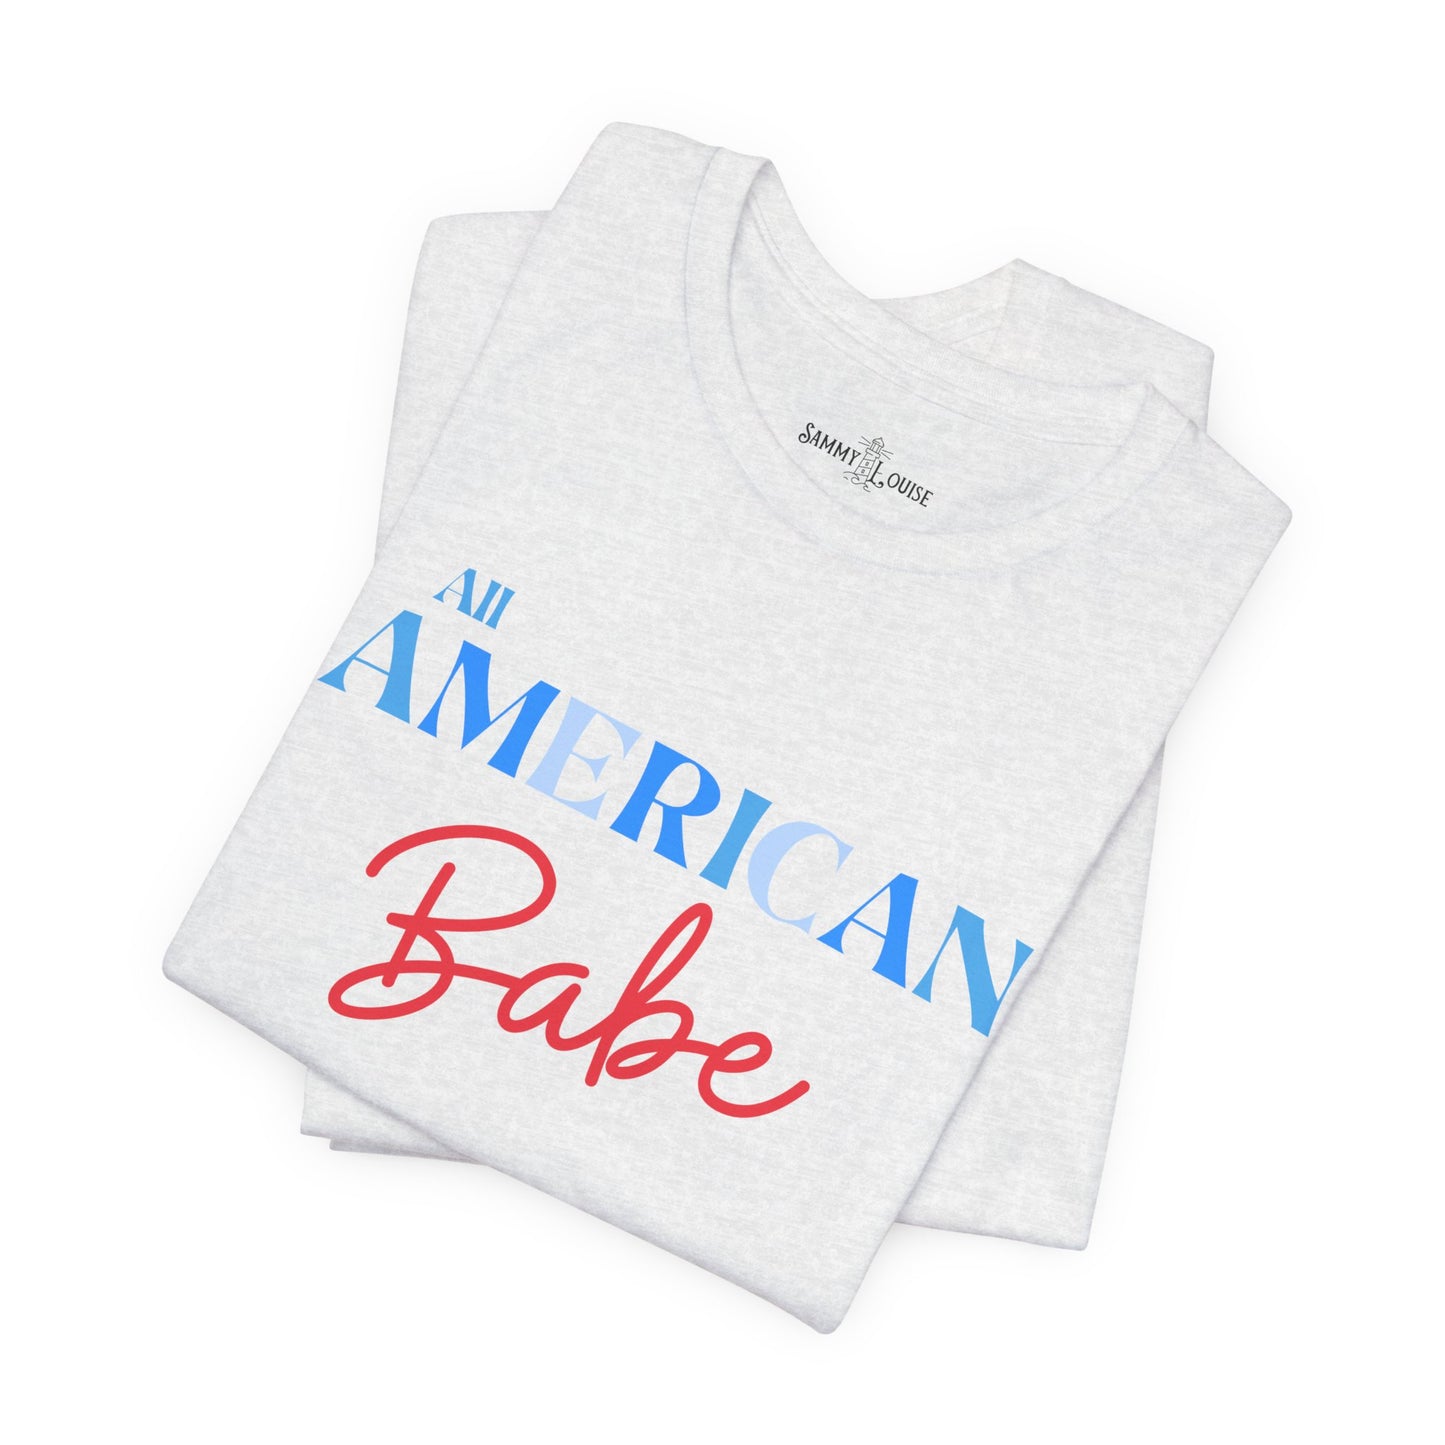 All American Babe | 4th of July | Tee | USA